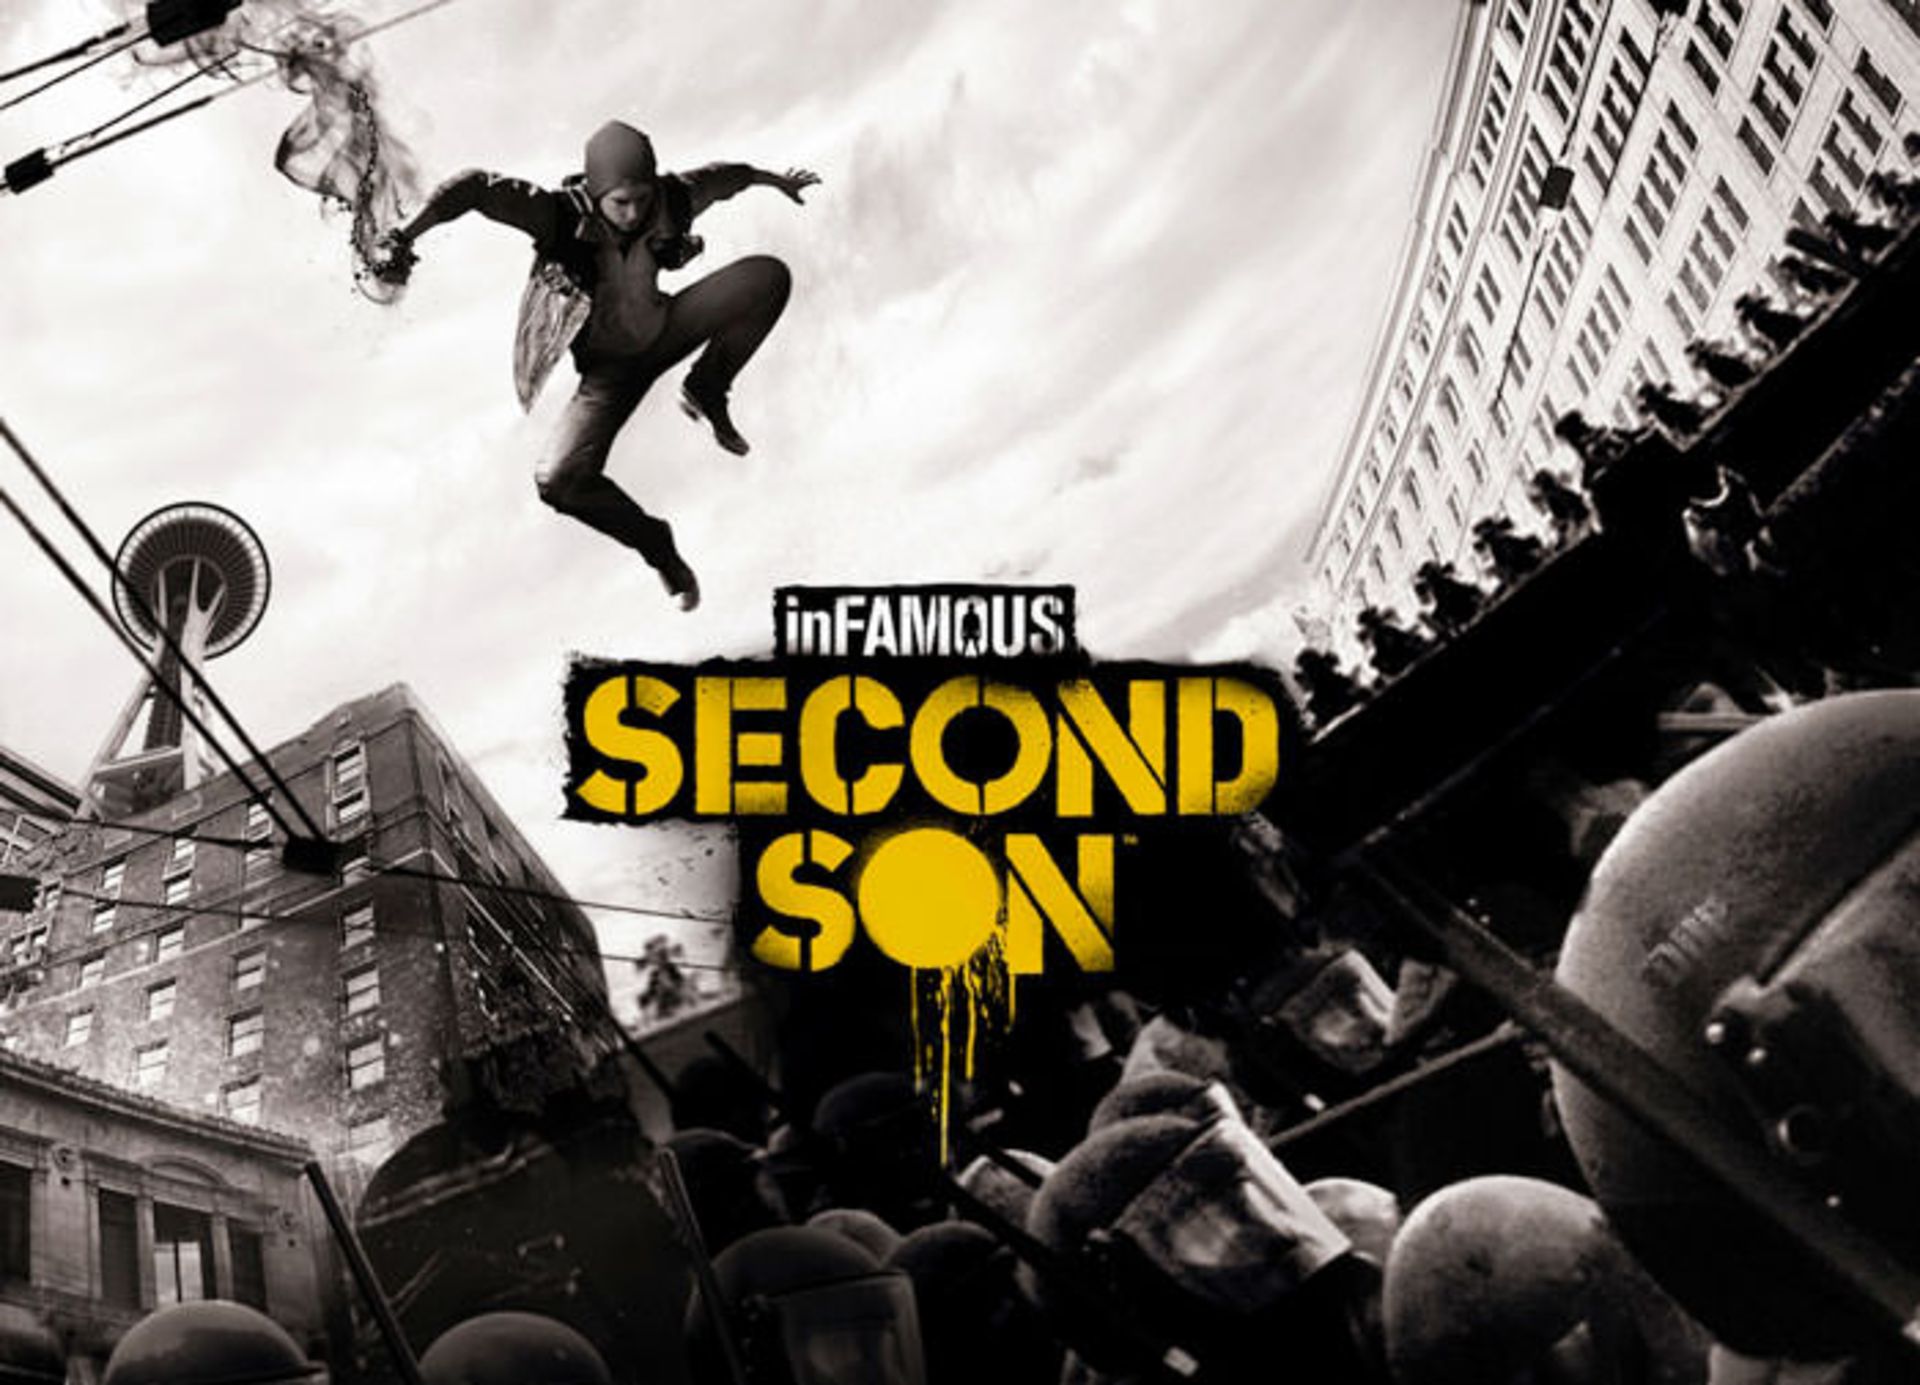 inFamous-Second-Son-poster